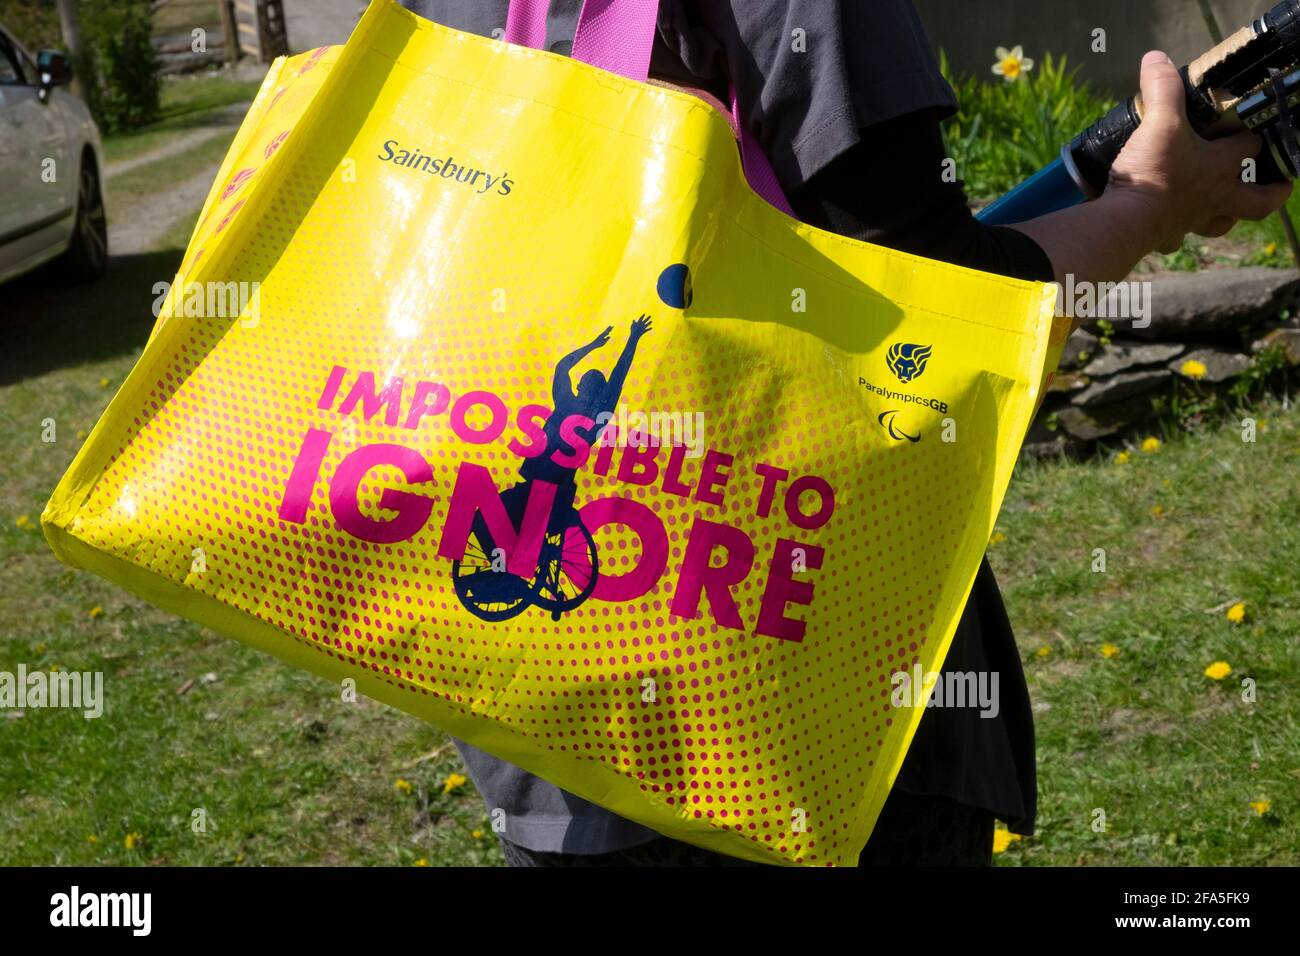 Sainsbury's store 'Impossible to ignore' Paralympics GB logo on yellow plastic shopping bag customer in Wales UK  KATHY DEWITT Stock Photo